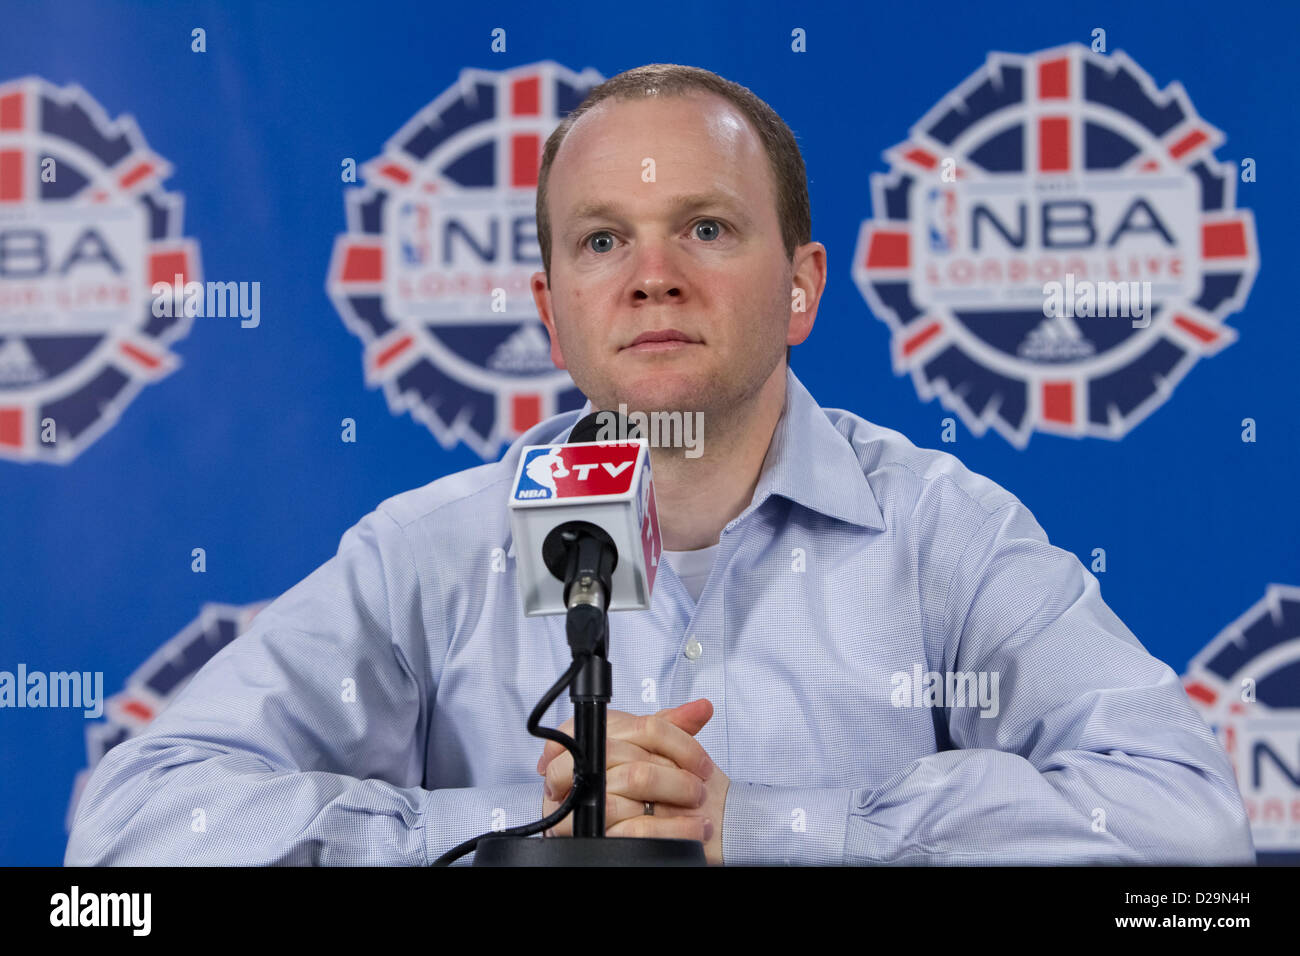 17.01.2013 London, England. Detroit Pistons head coach Lawrence Frank talking to the press ahead of the NBA London Live 2013 game between the Detroit Pistons and the New York Knicks from The O2 Arena Stock Photo